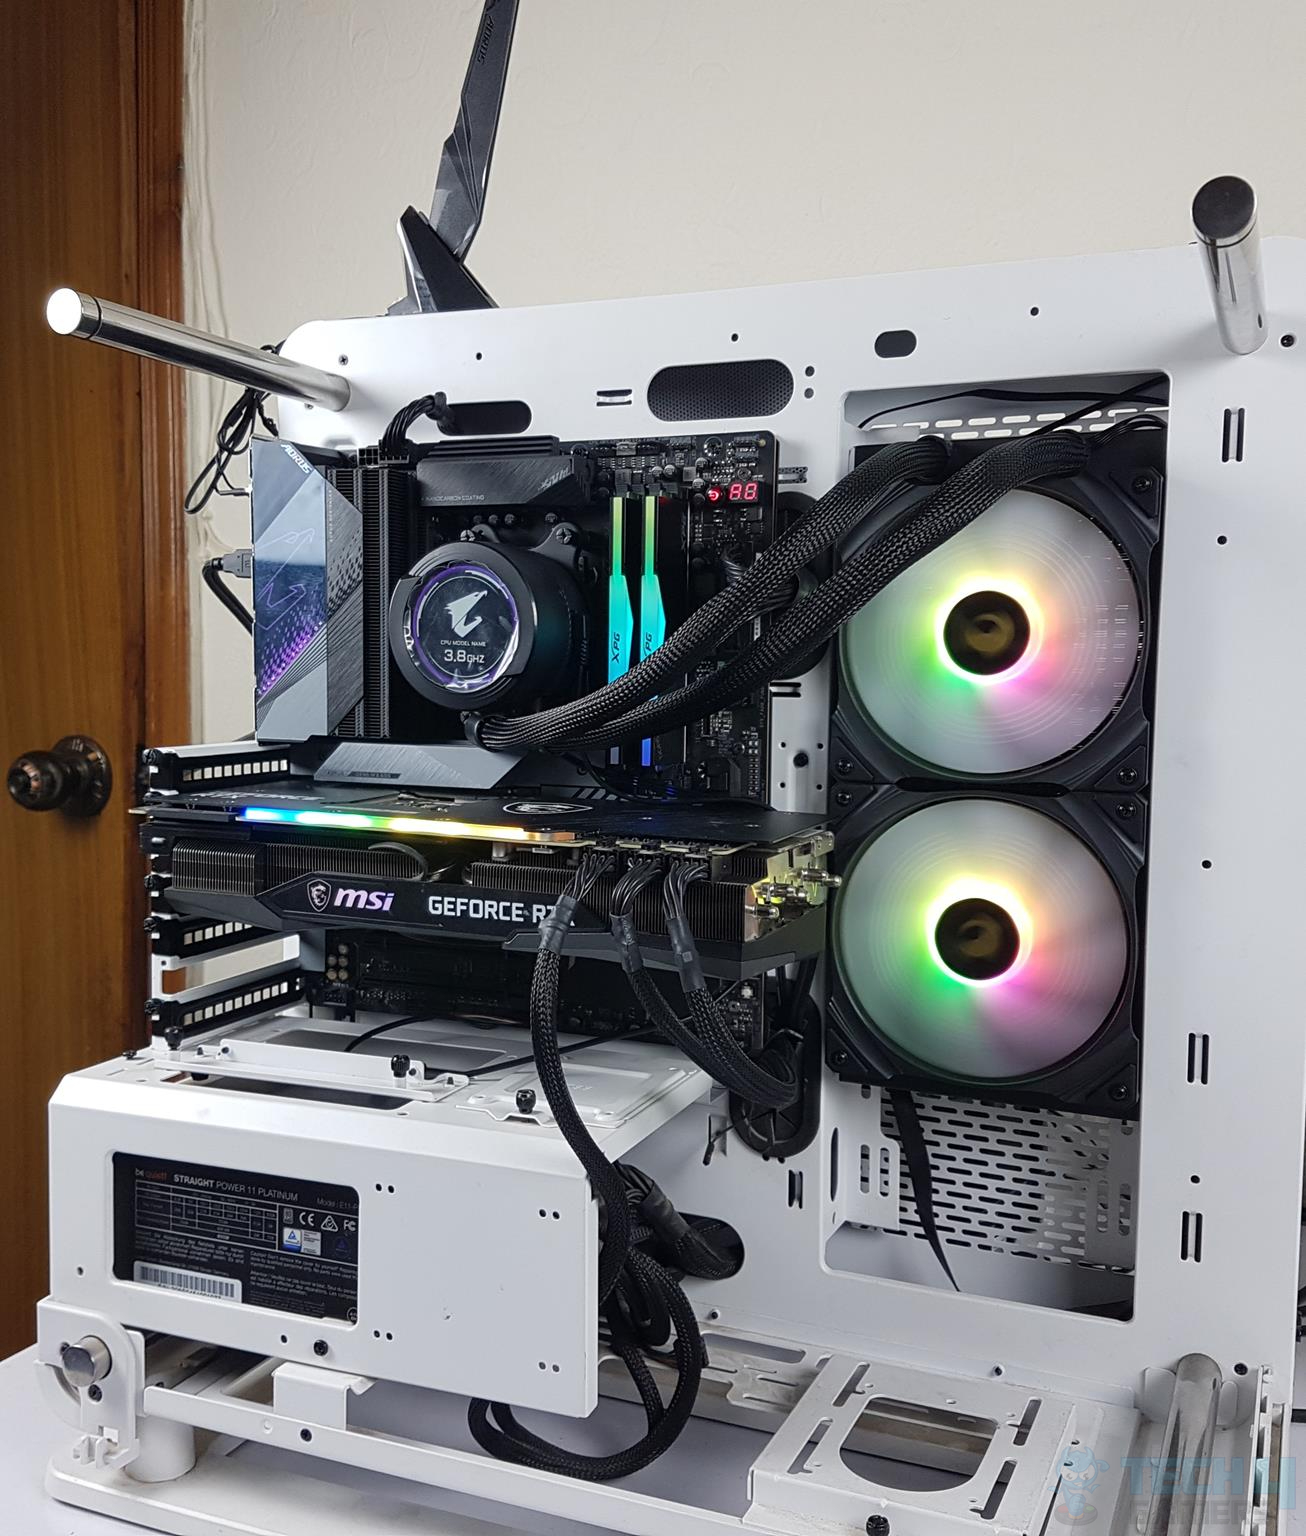 AORUS WATERFORCE X 280 Another side view of the testing rig